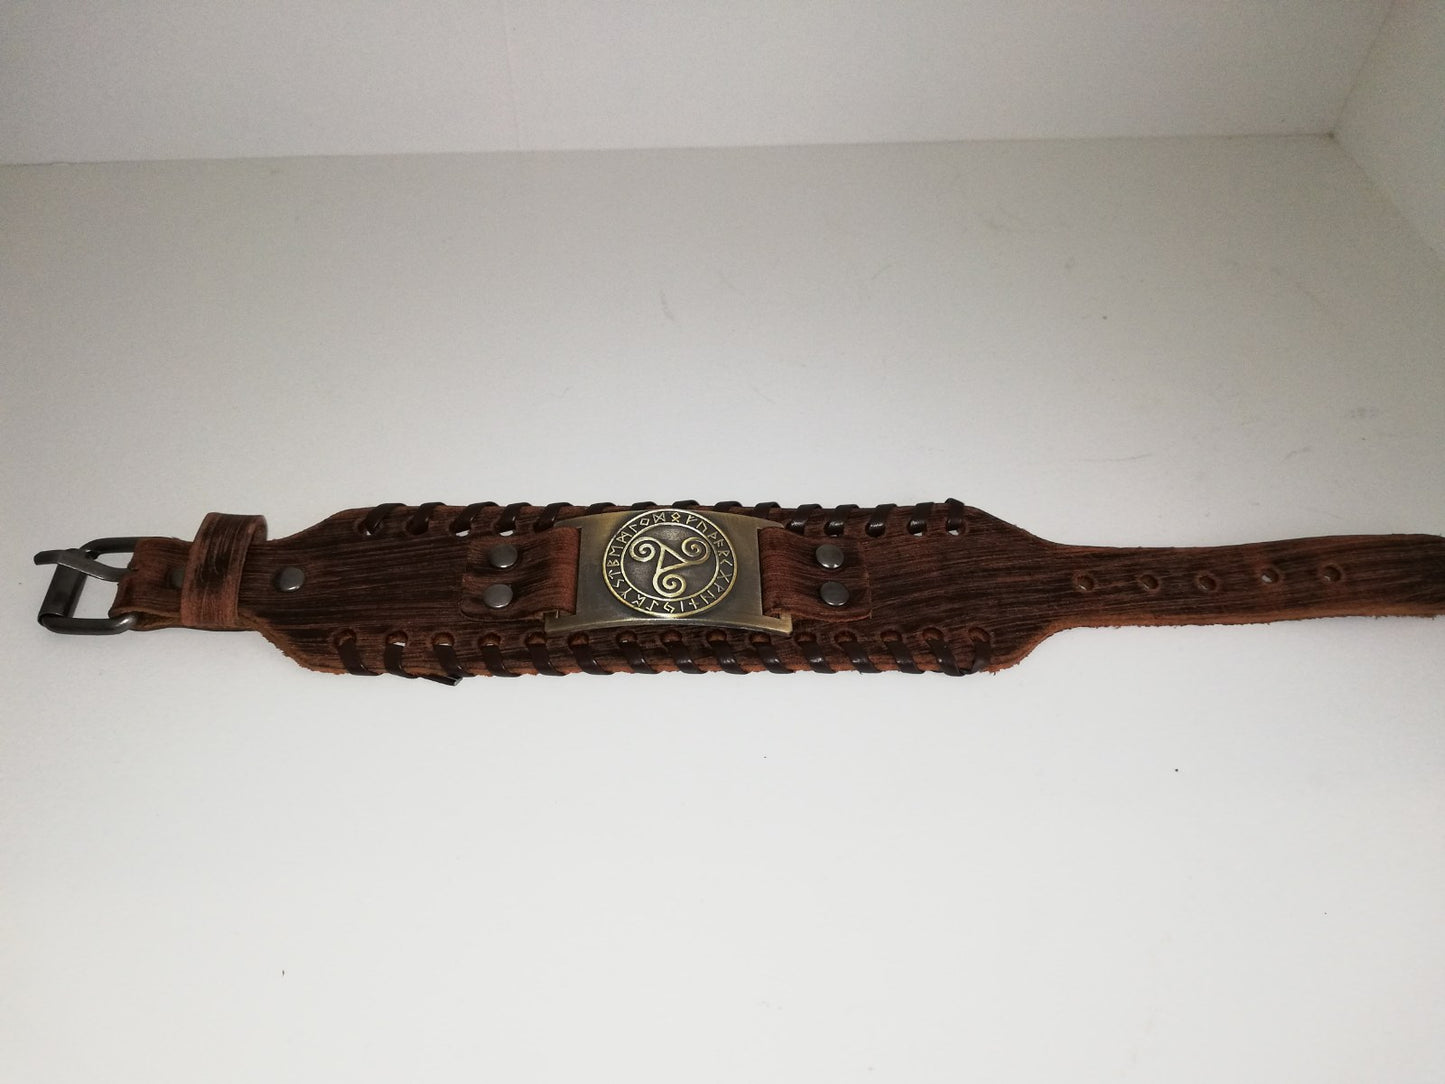 Brown leather bracelet with gold colored BDSM logo